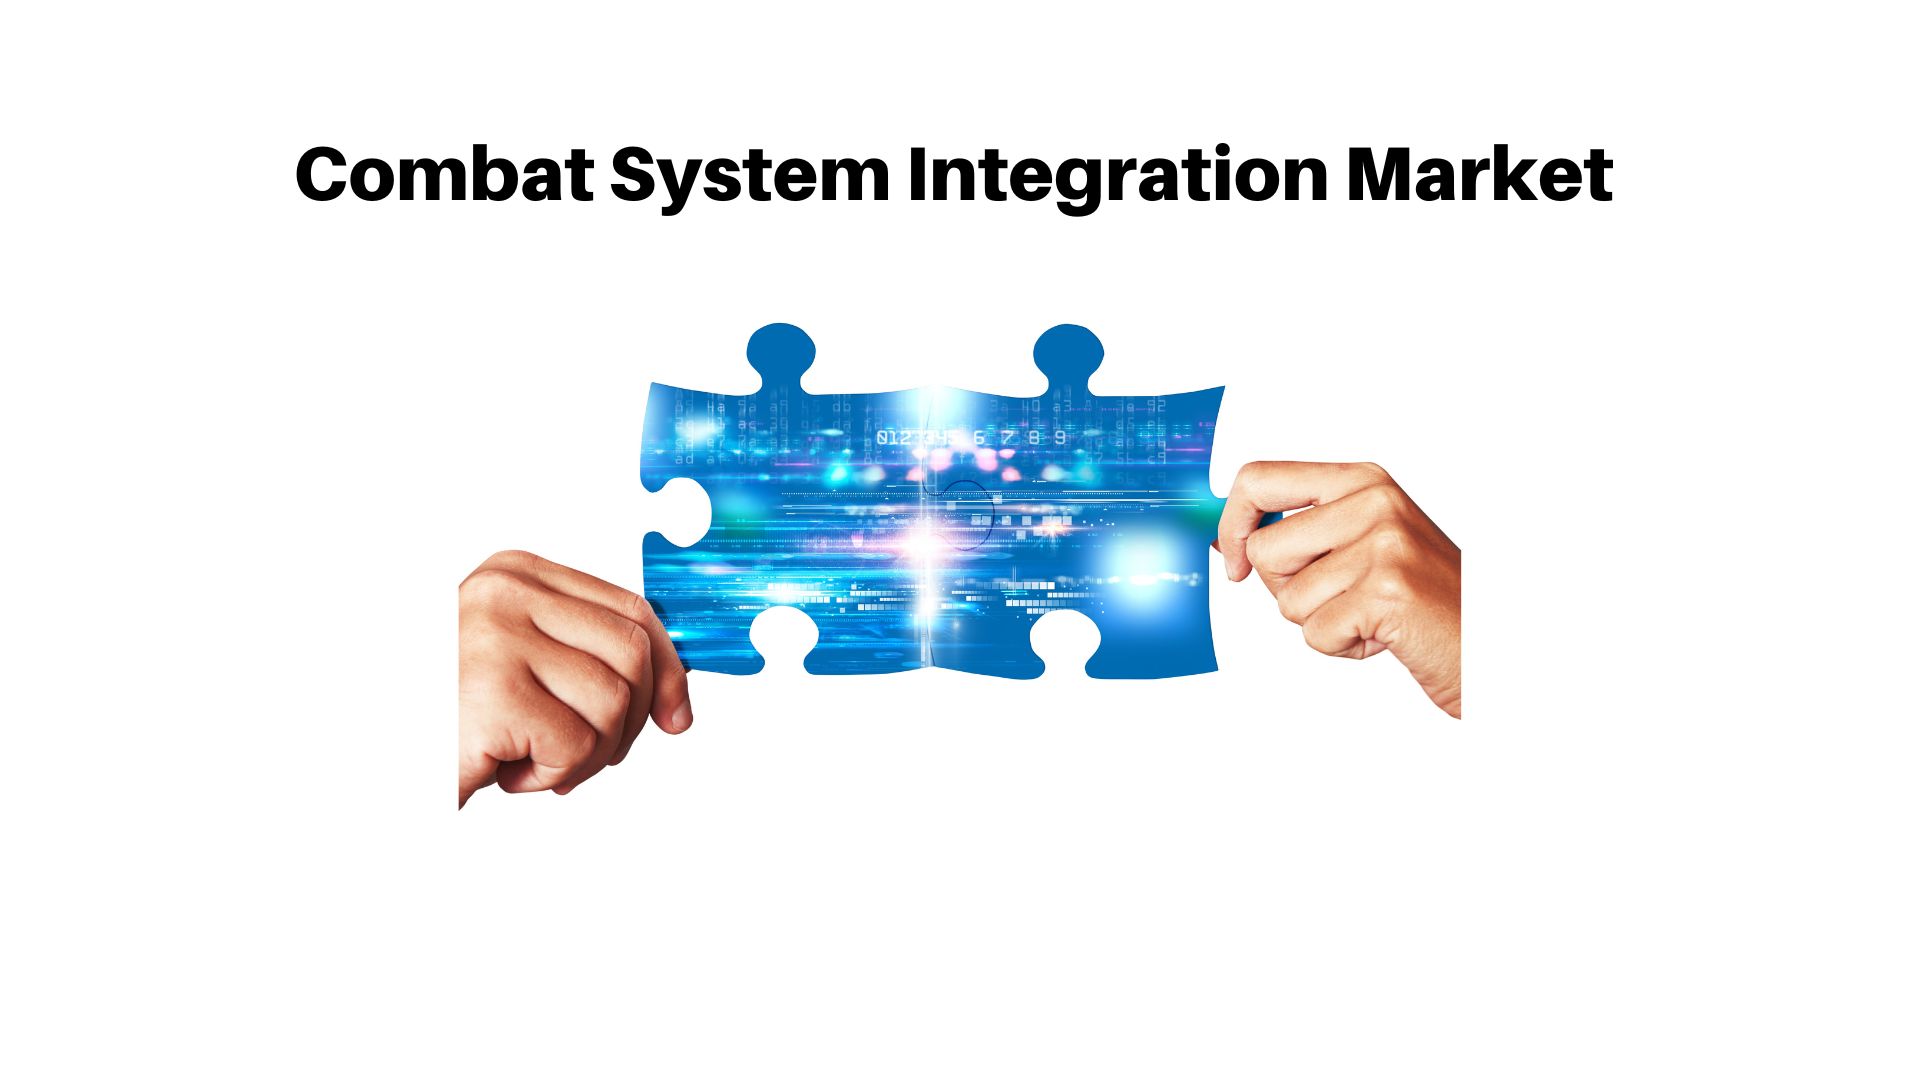 Combat System Integration Market Expected to Expand at a Growing CAGR of 34.7% through 2033